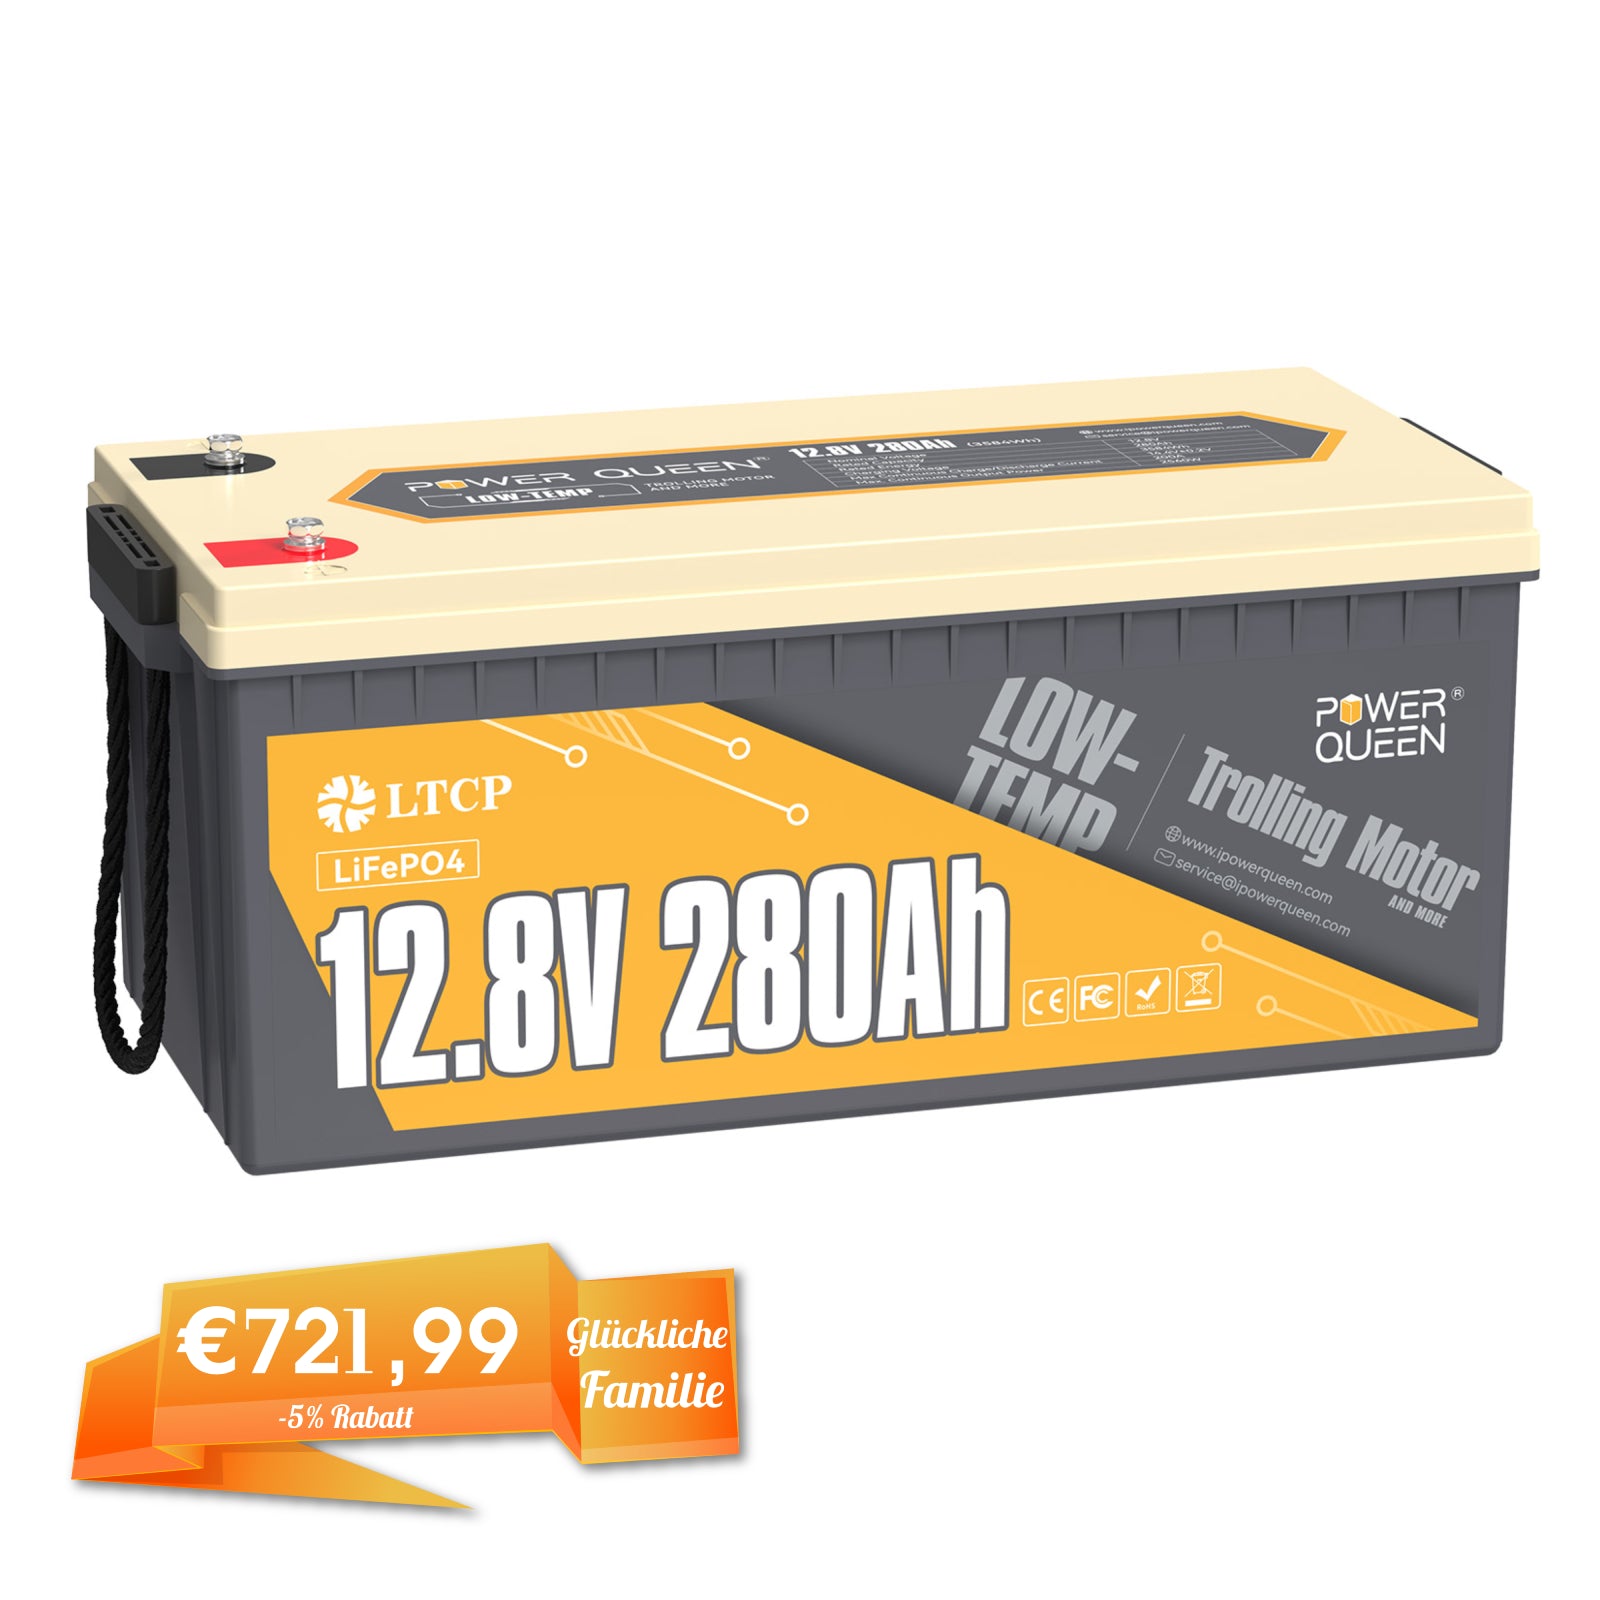 Power Queen 12V 280Ah low temperature LiFePO4 battery with 200A BMS